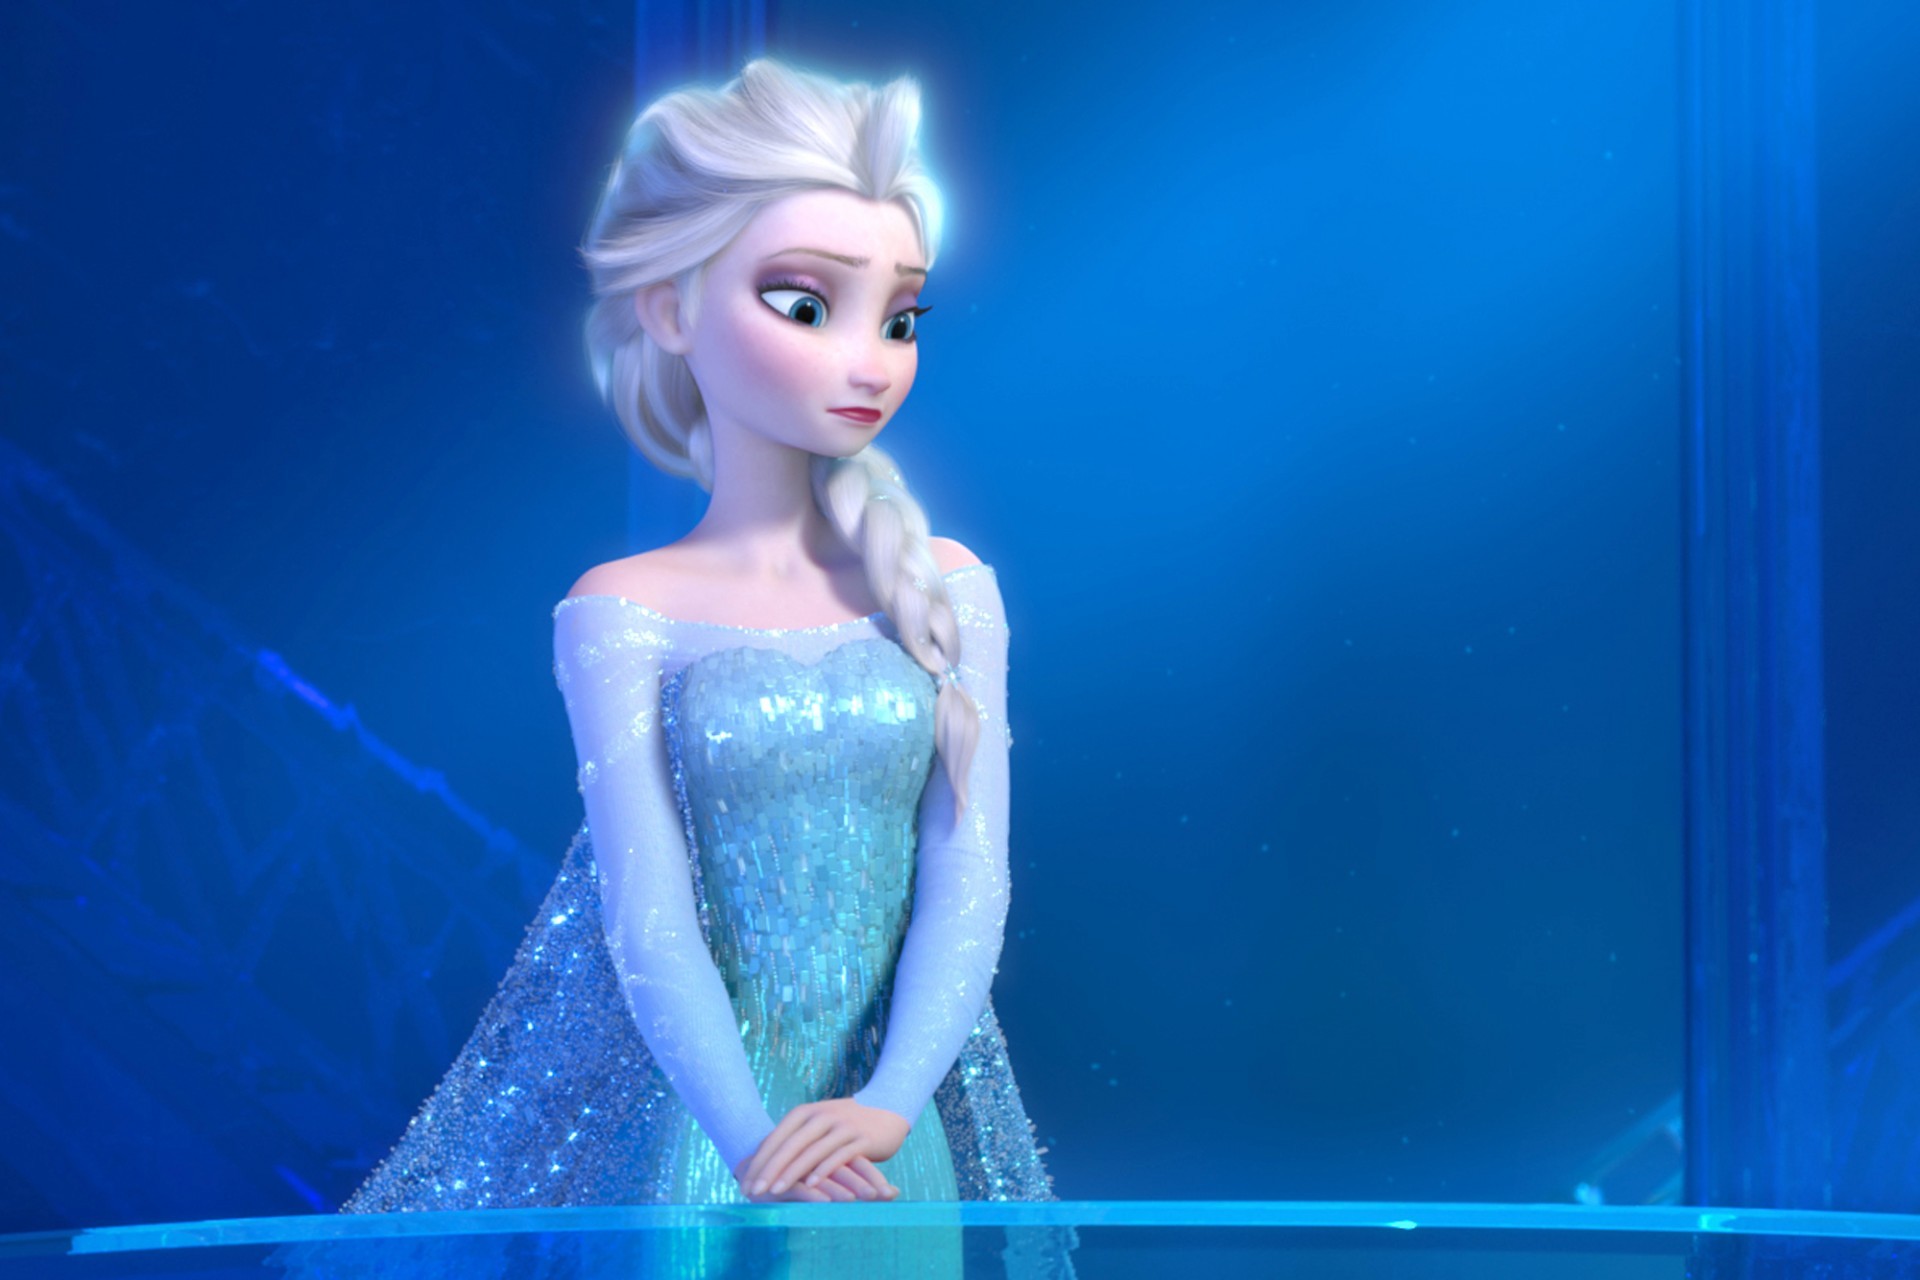 1920x1280 Frozen movie poster Â« HD Movie Wallpapers | HD Movie Wallpapers .